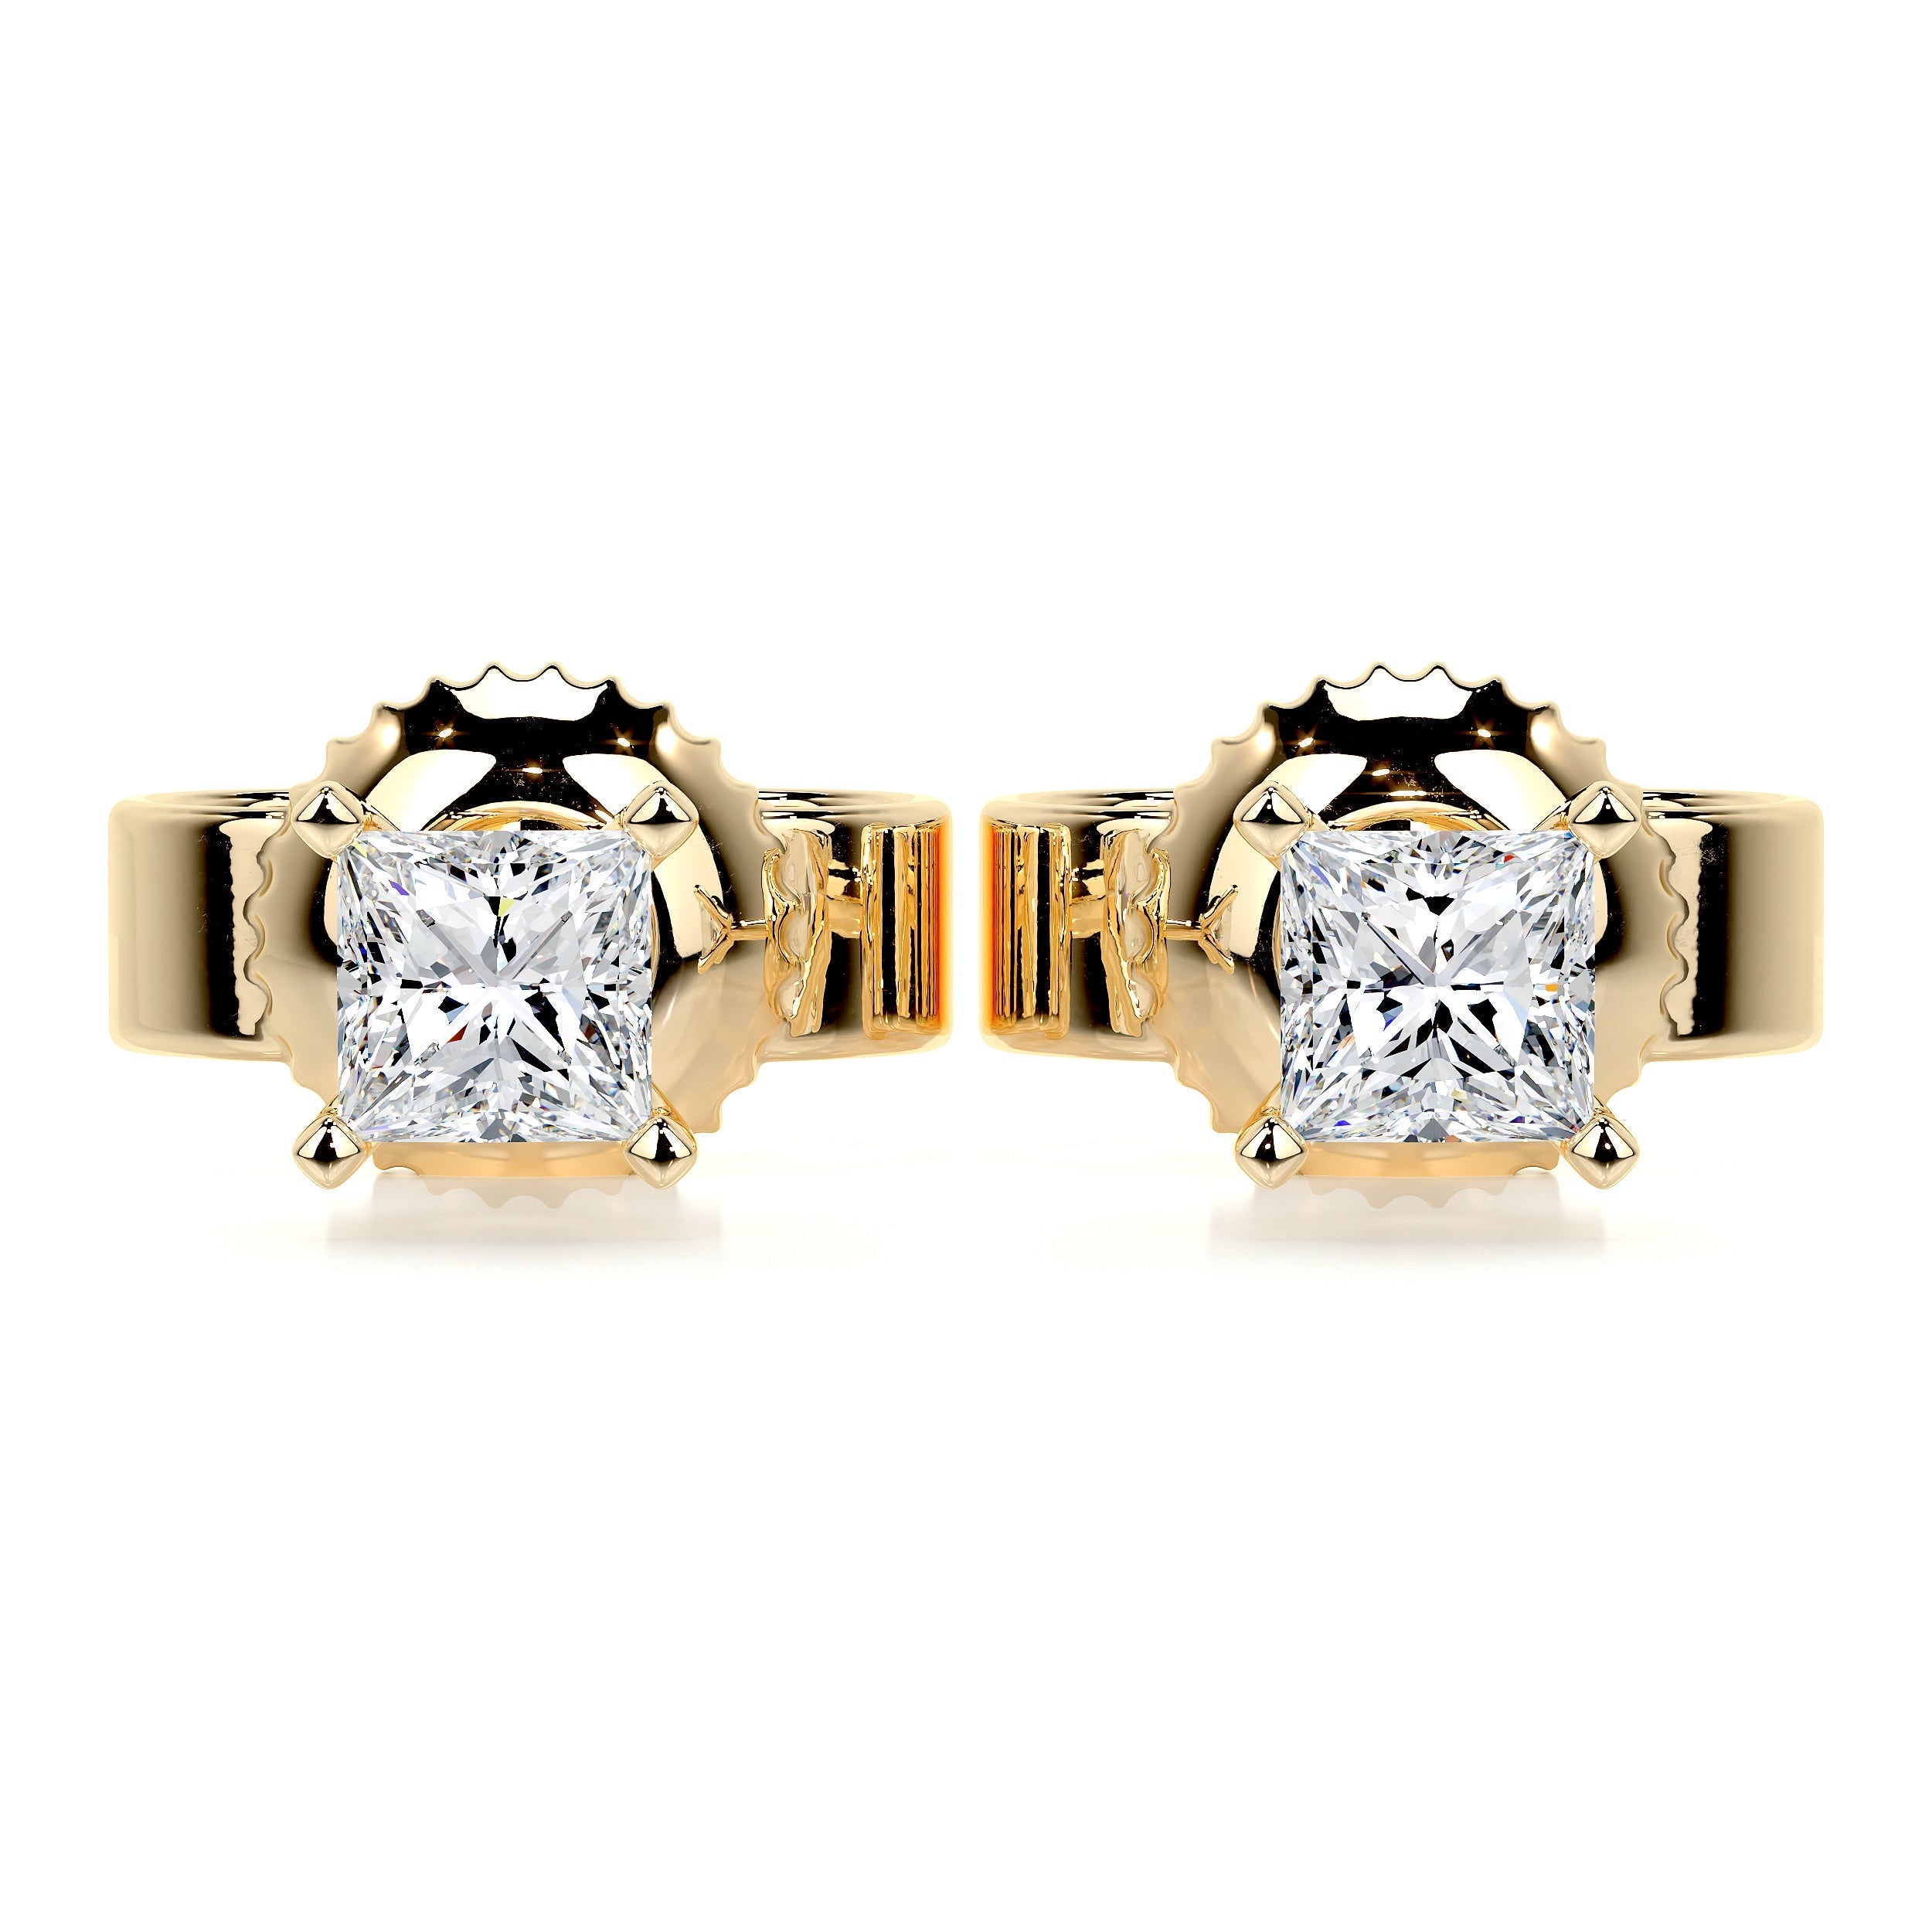 Share 254+ diamond solitaire earrings yellow gold super hot